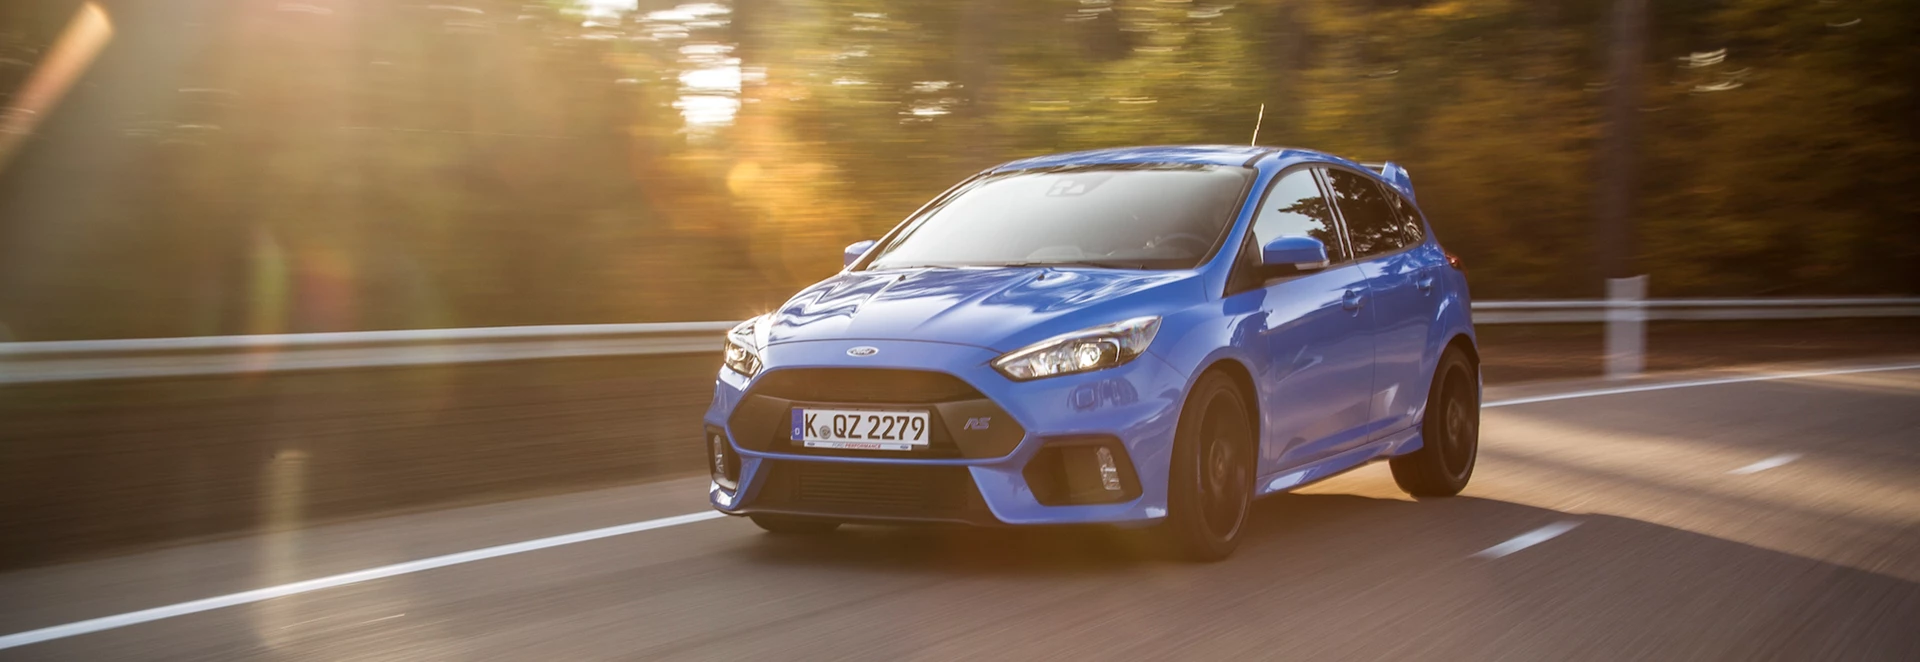 2018 Ford Focus RS review